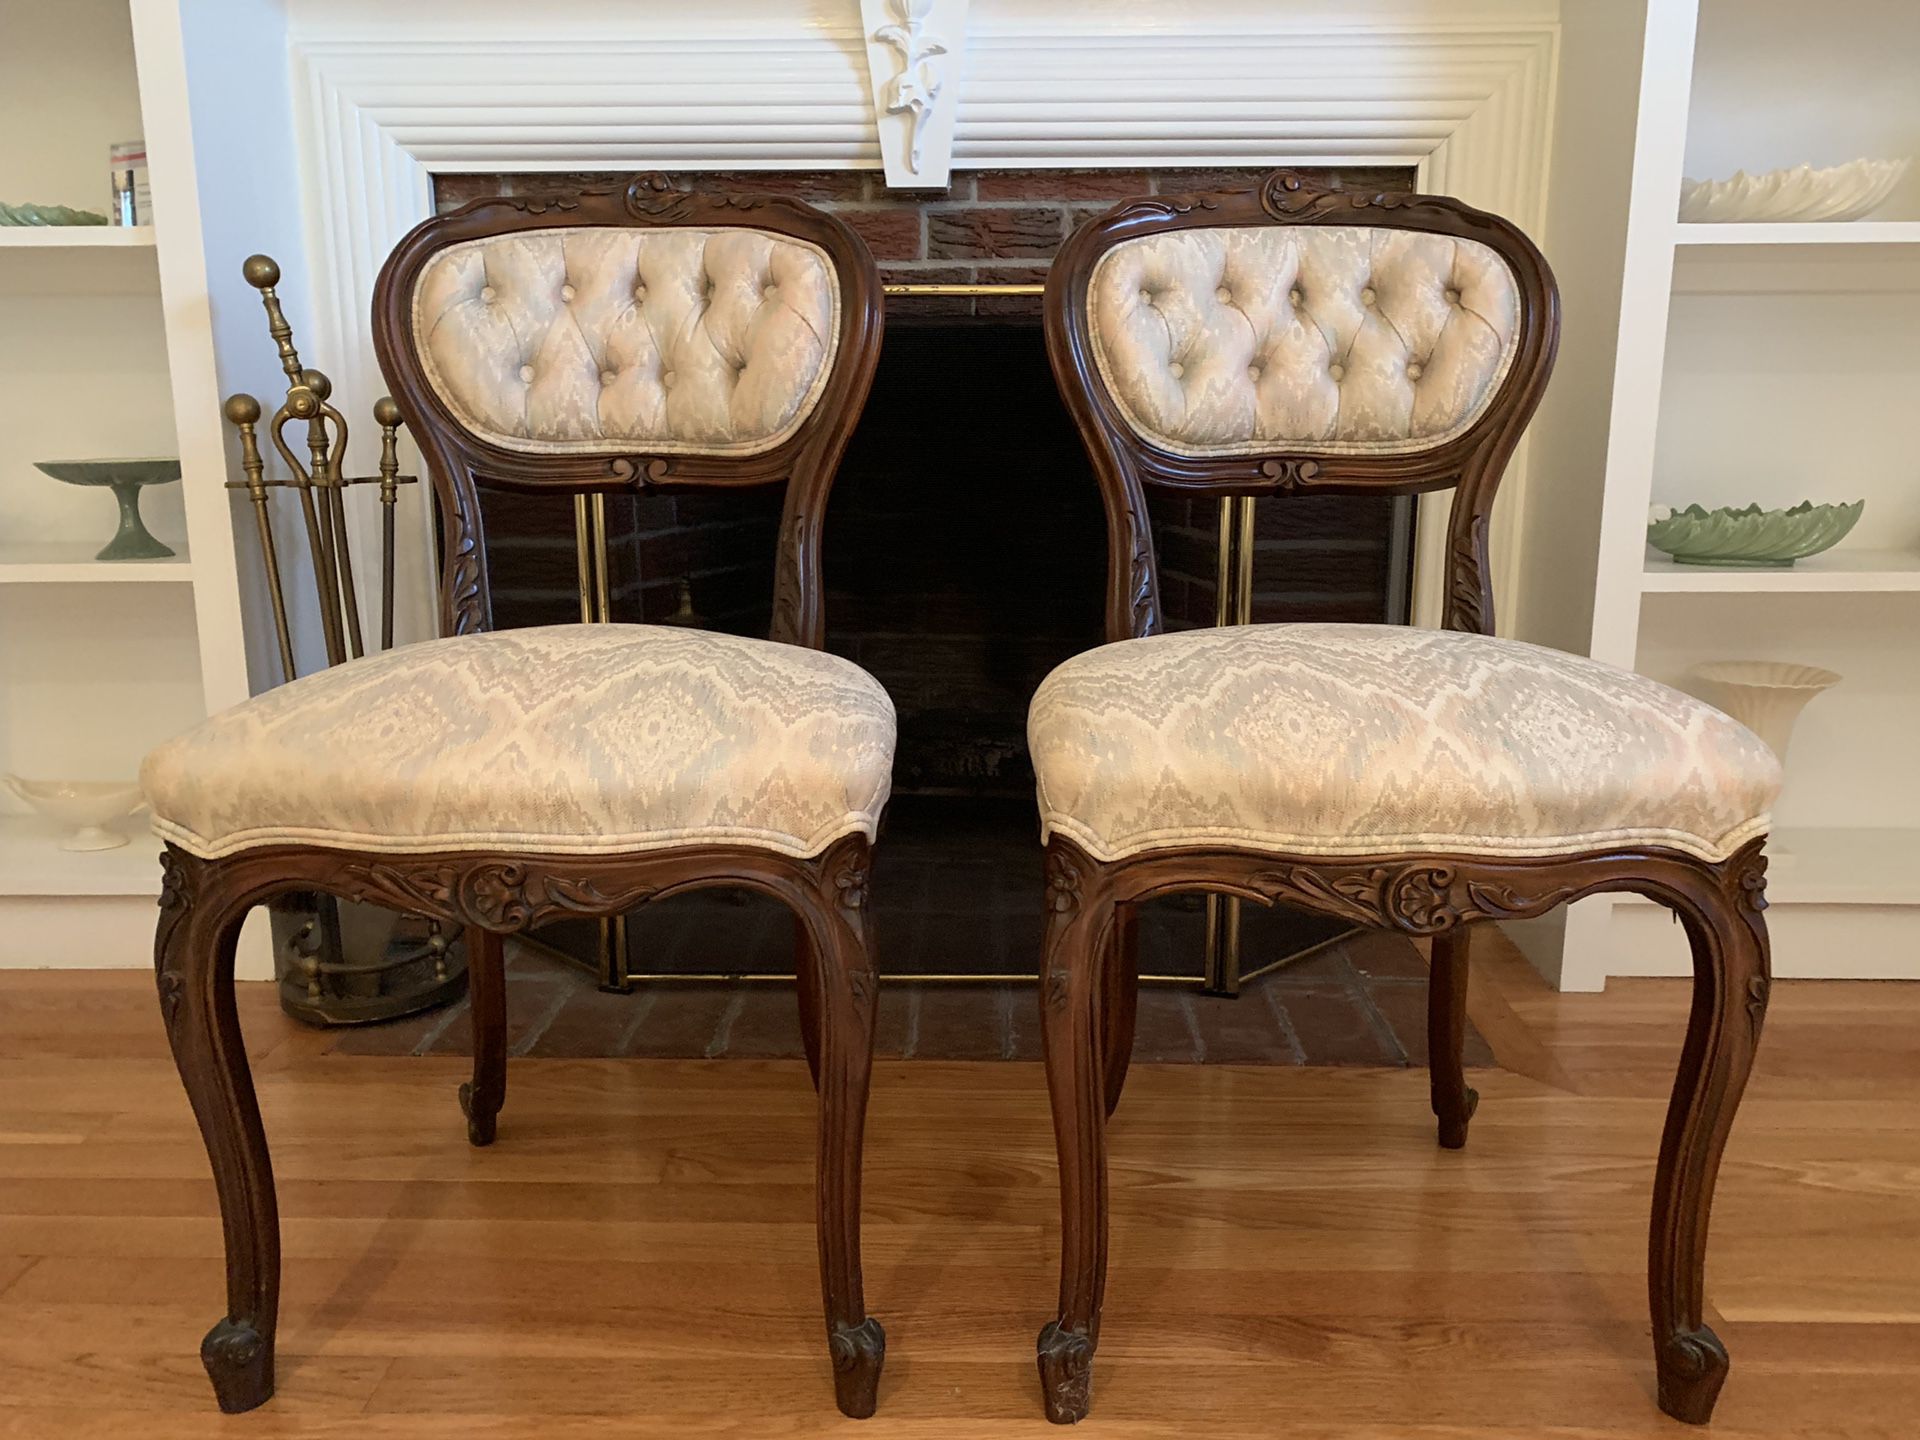 Antique Upholstered Side Chairs